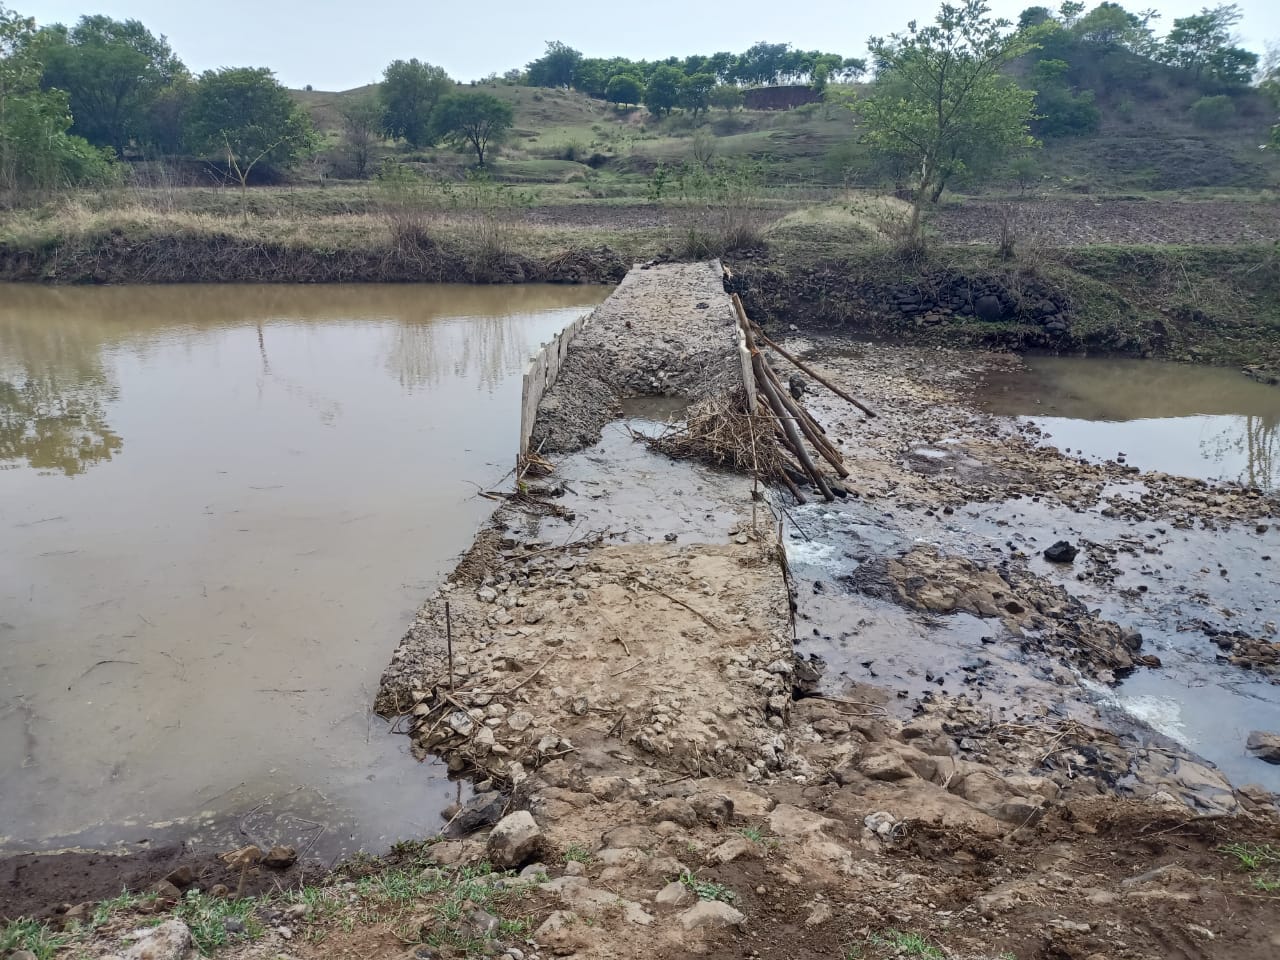 Front part of check dam washed away, continuous water leakage